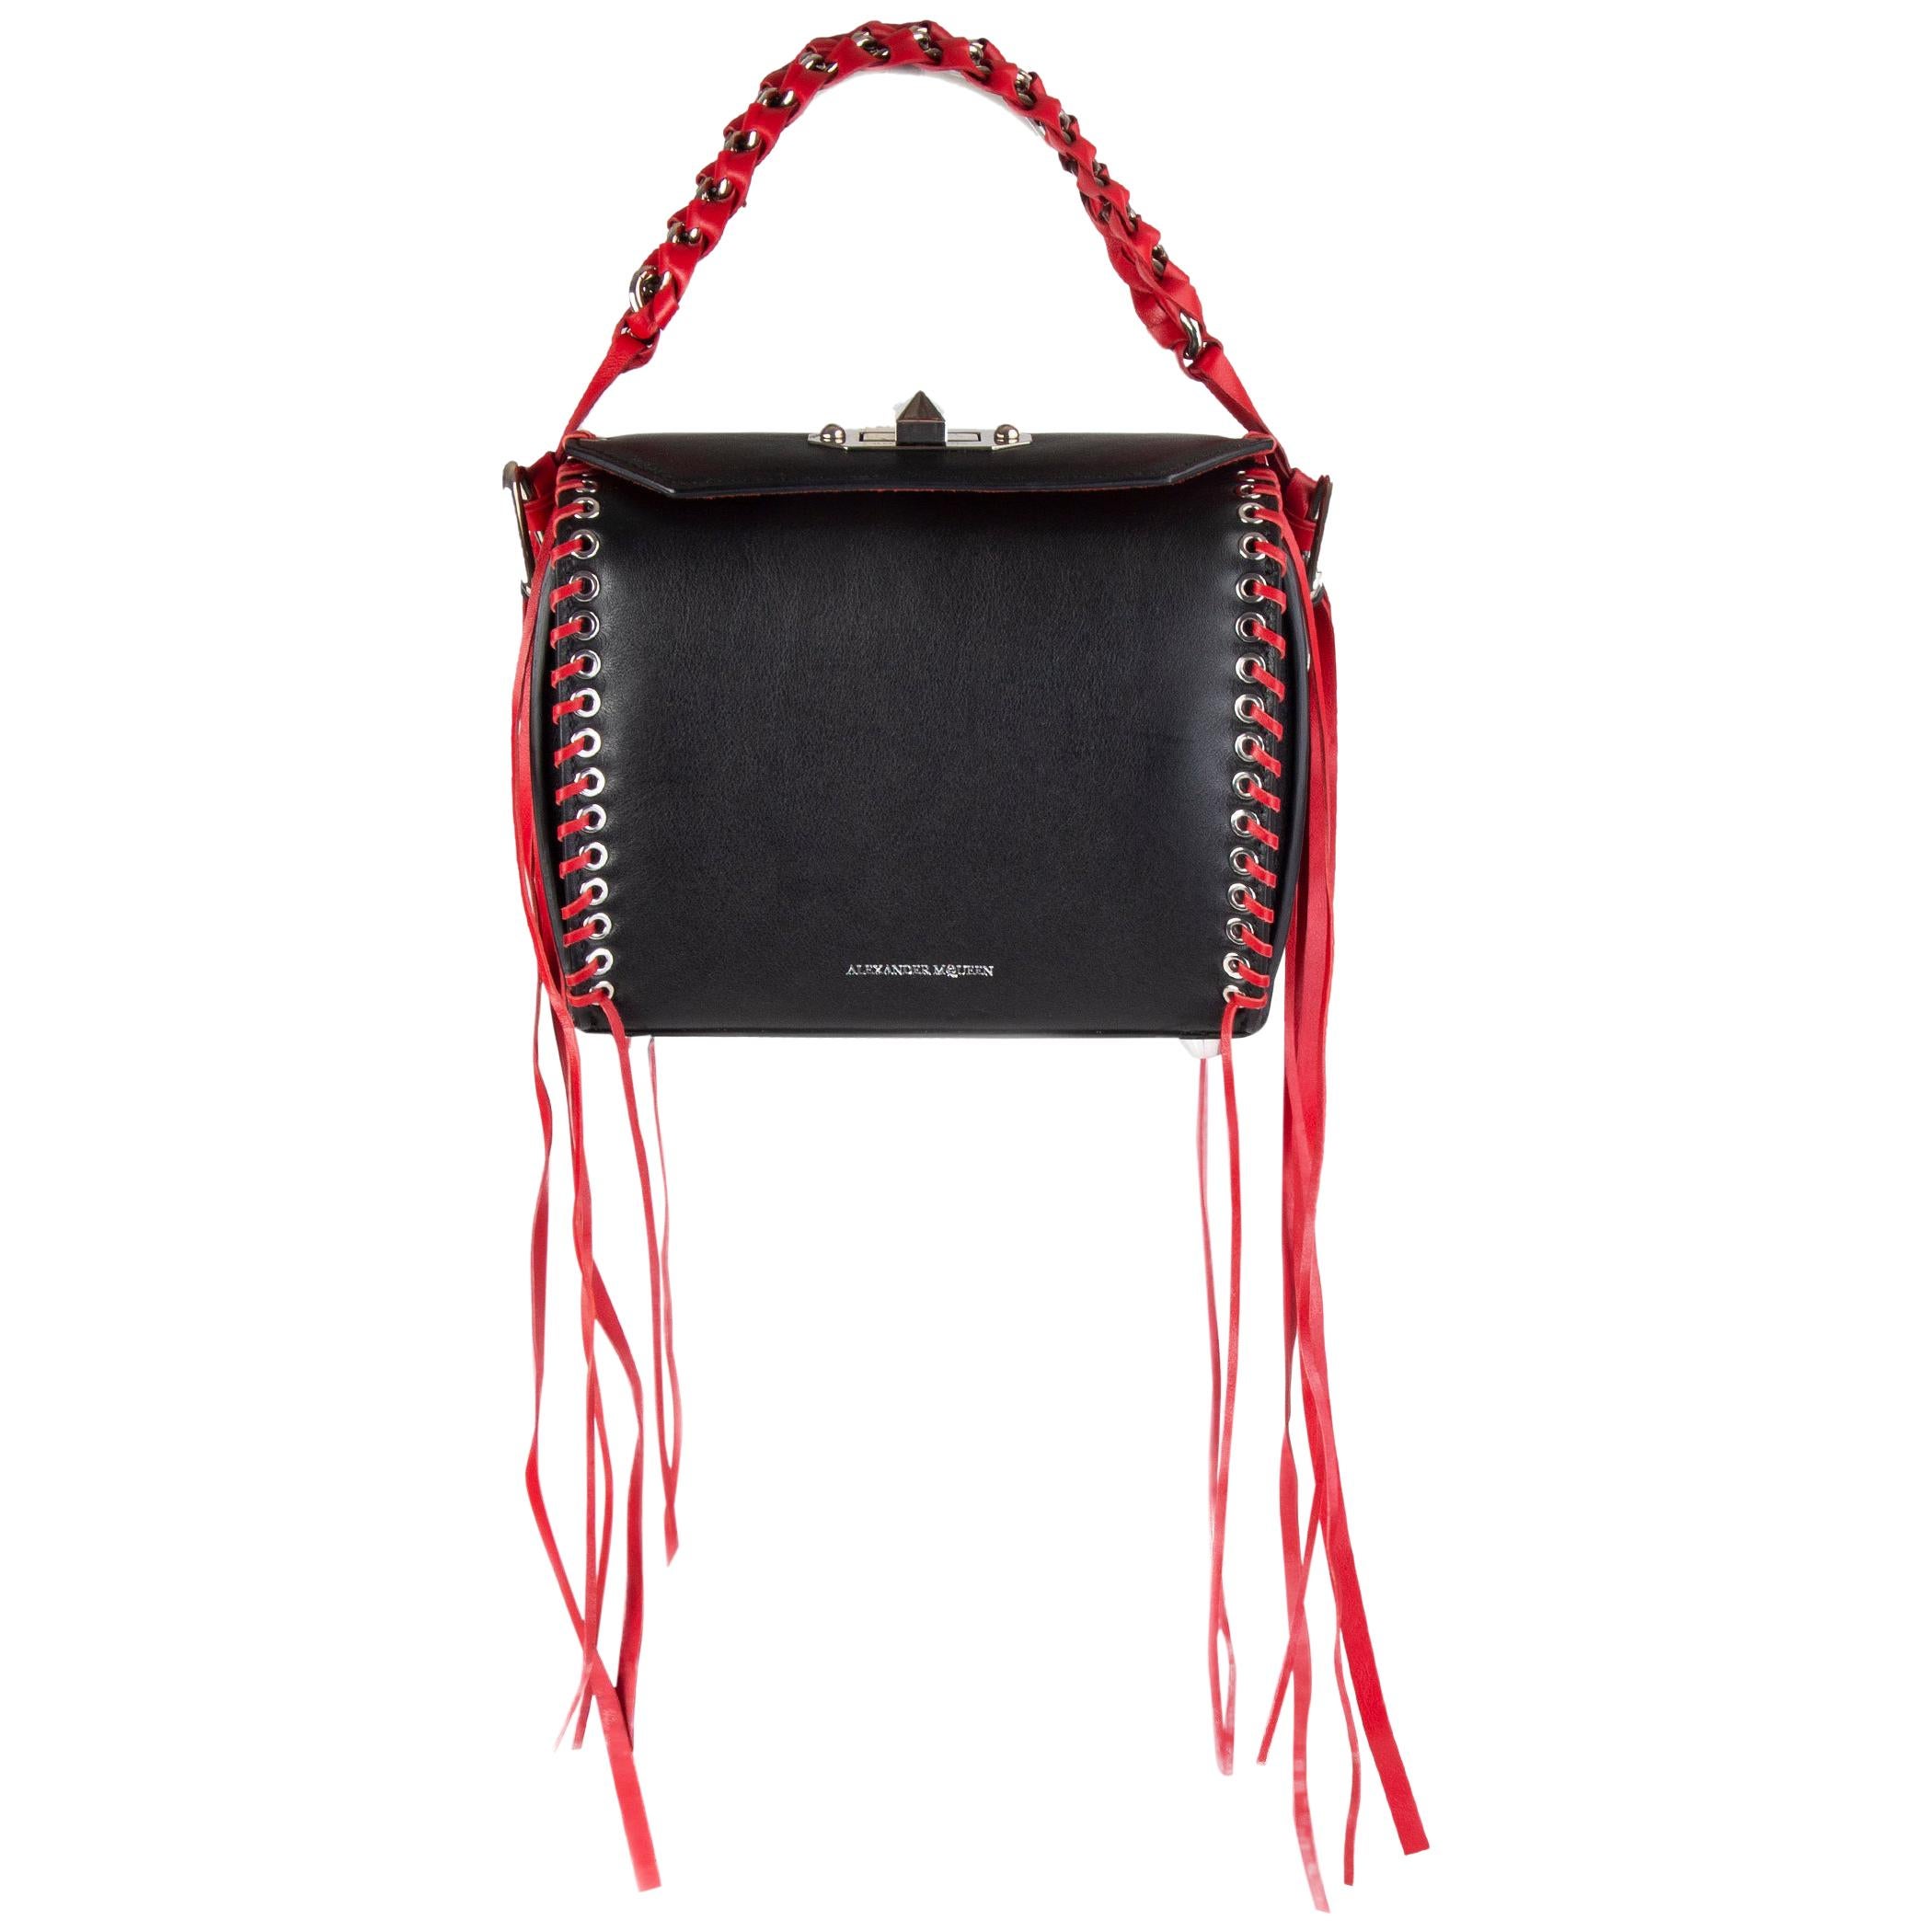 ALEXANDER MCQUEEN black & red leather BOX 19 WHIPSTITCH Bag